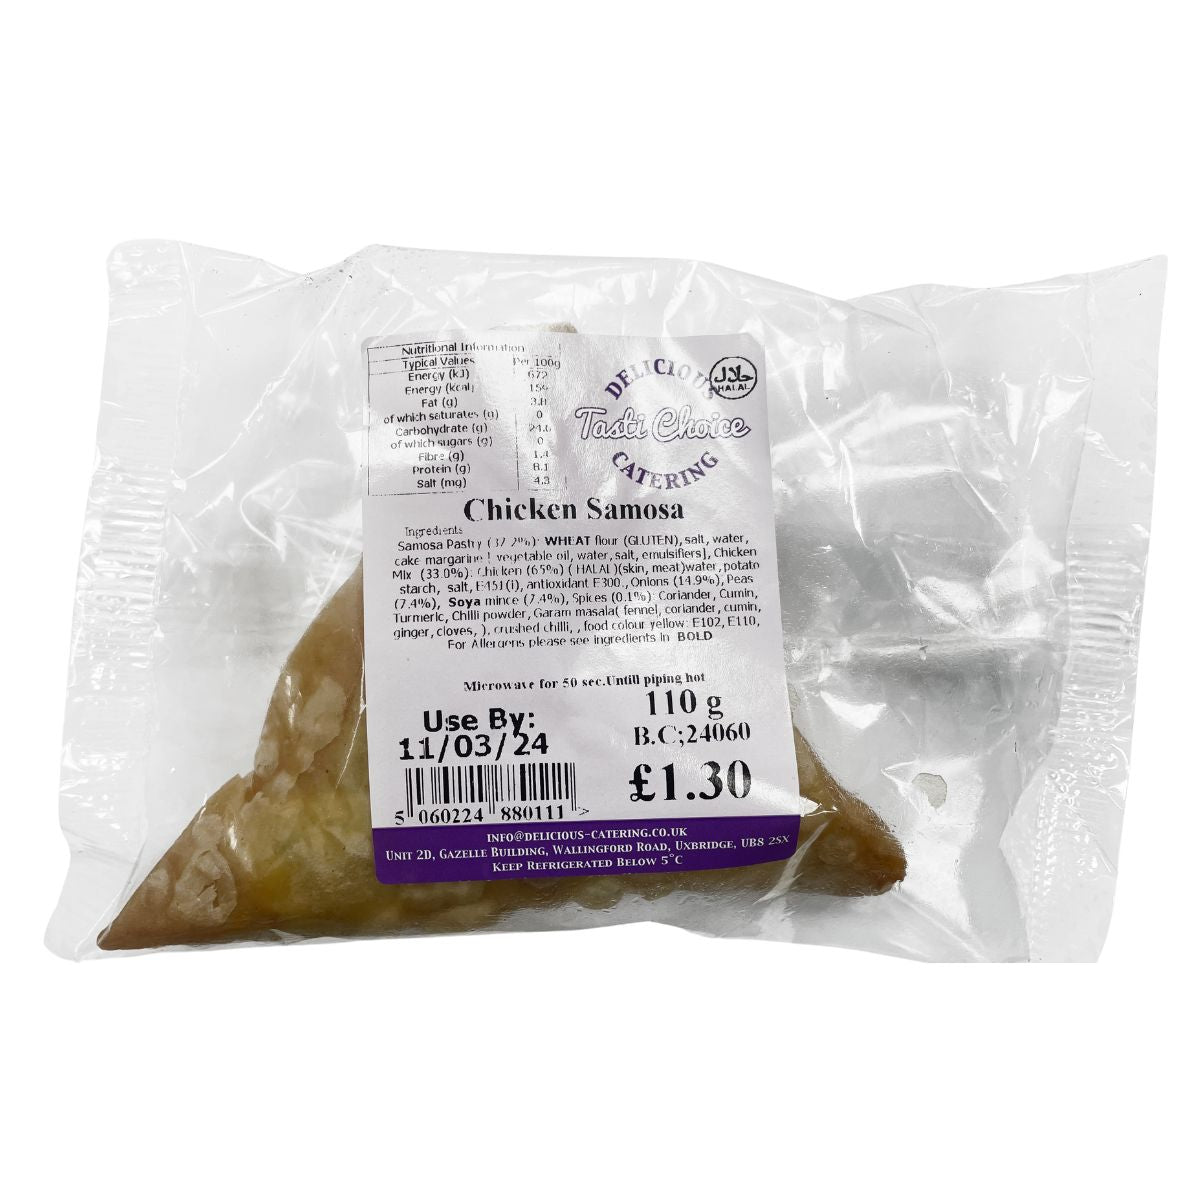 A bag of Delicious Catering - Tasti Choice Chicken Samosa - 110g on a white background.